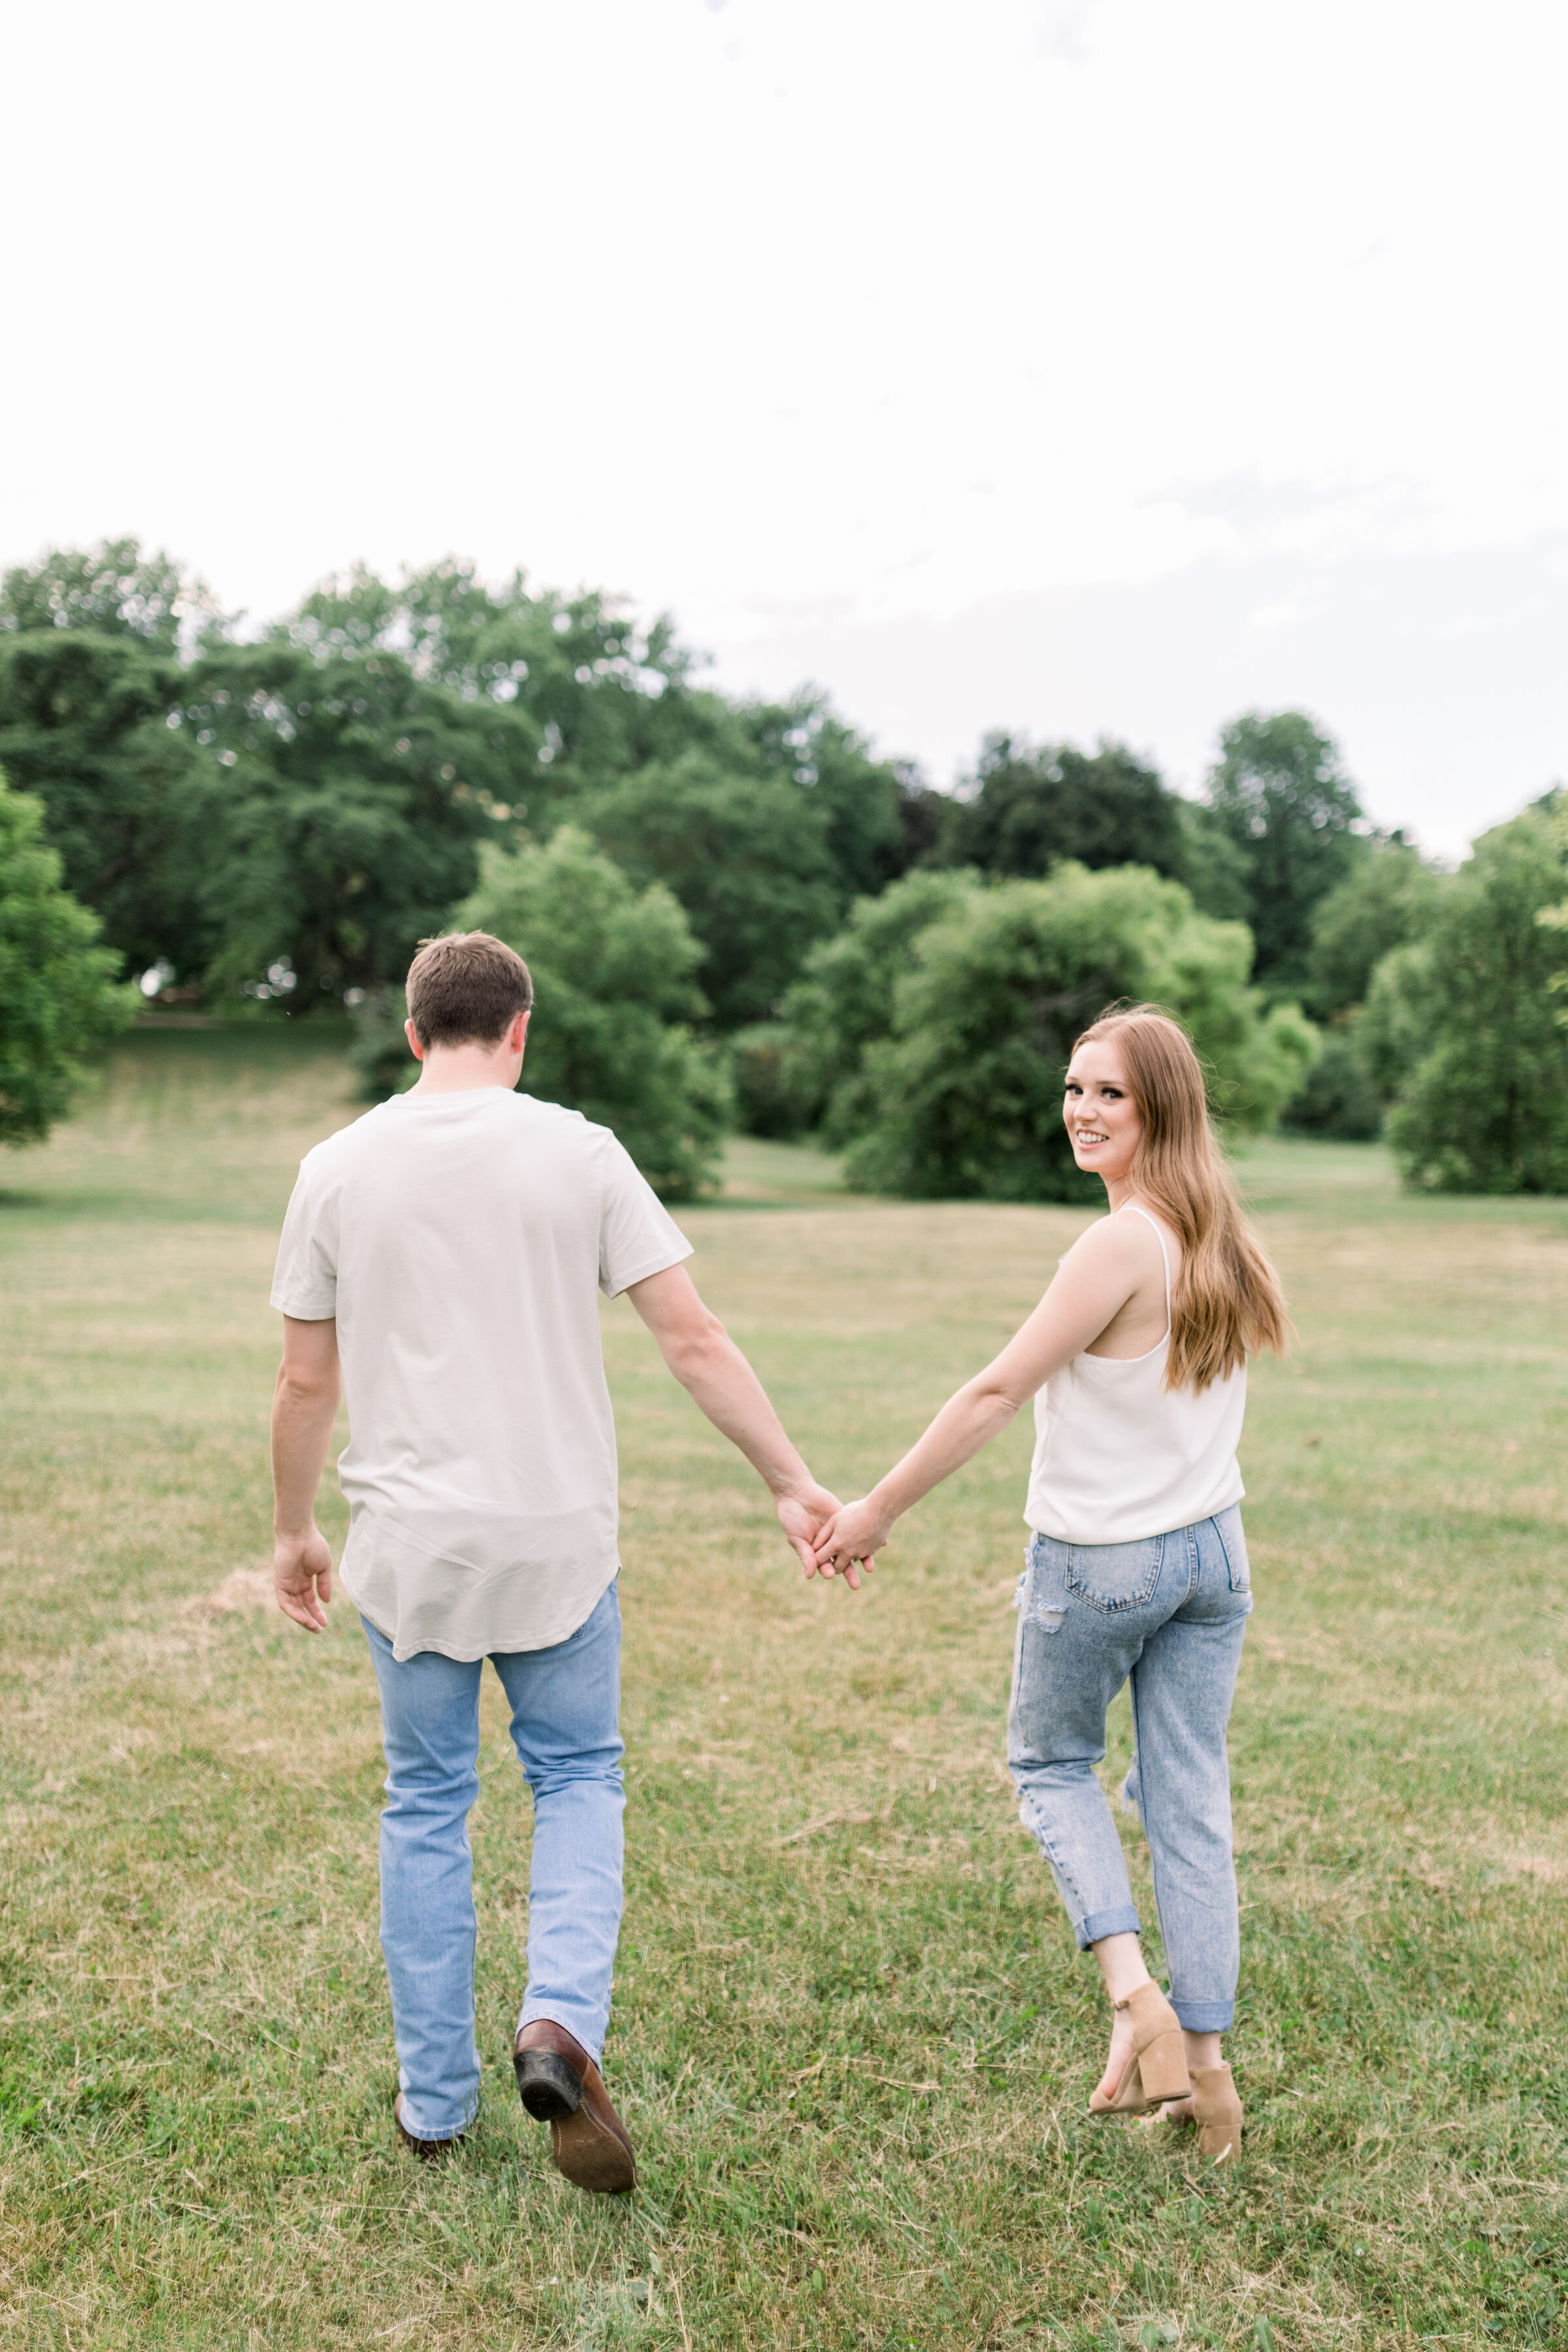  Ottawa, Ontario couples photographer, Chelsea Mason Photography captures this engaged couple walking hand-in-hand through a grassy field. grassy field engagement session Ottawa Ontario couples photographer neutral engagement photo outfits #ChelseaMa